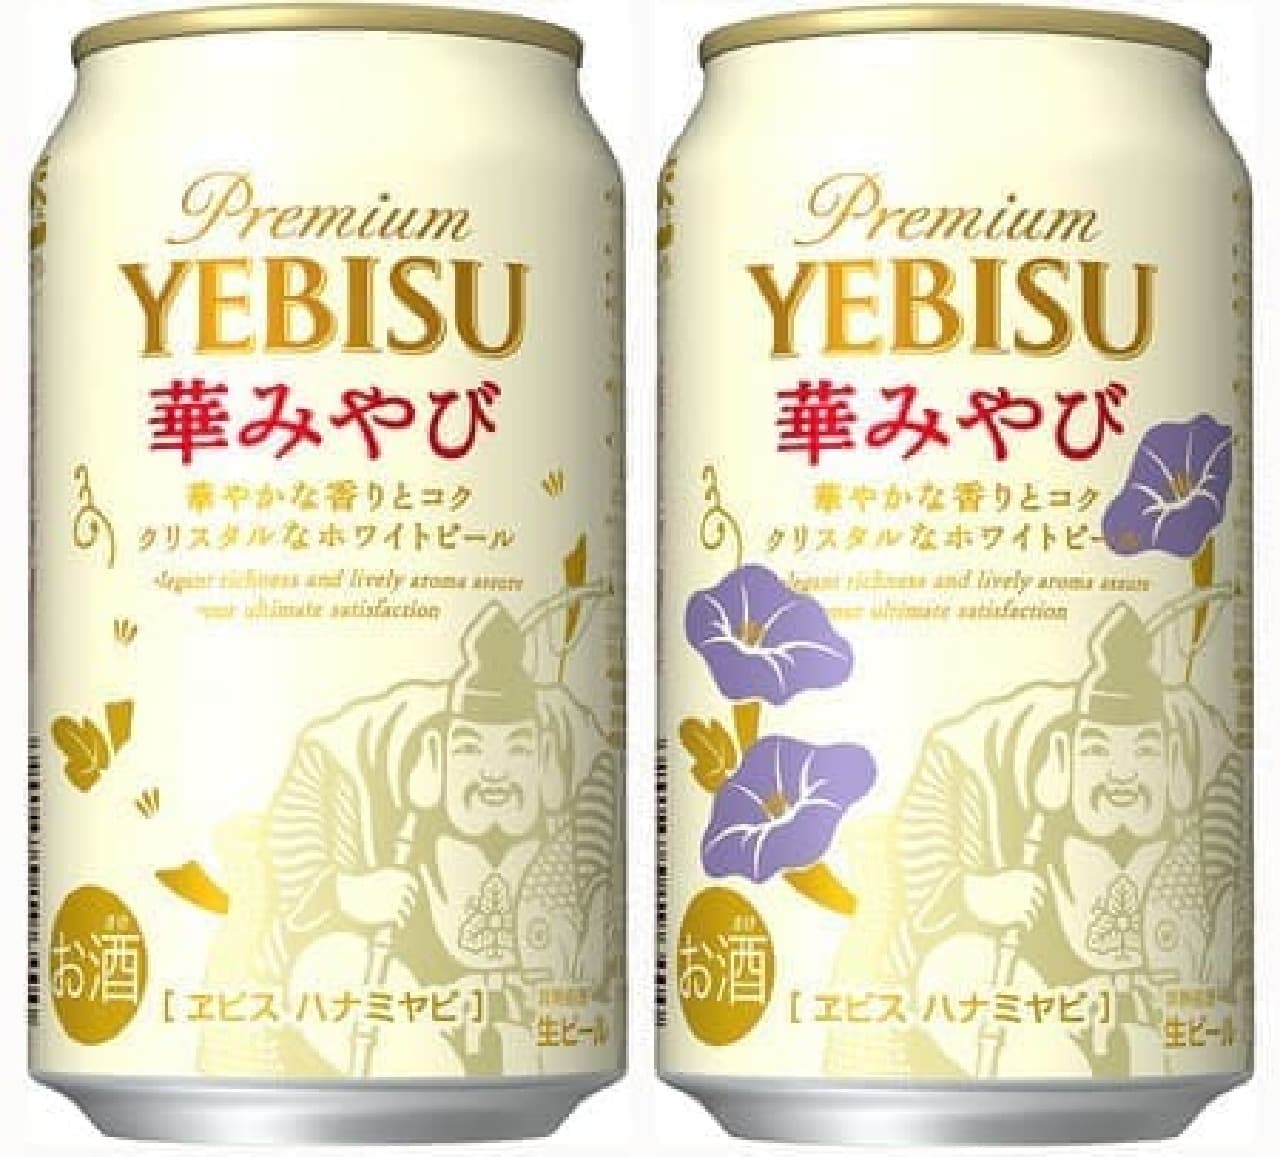 Yebisu Gorgeous design can that changes when cooled